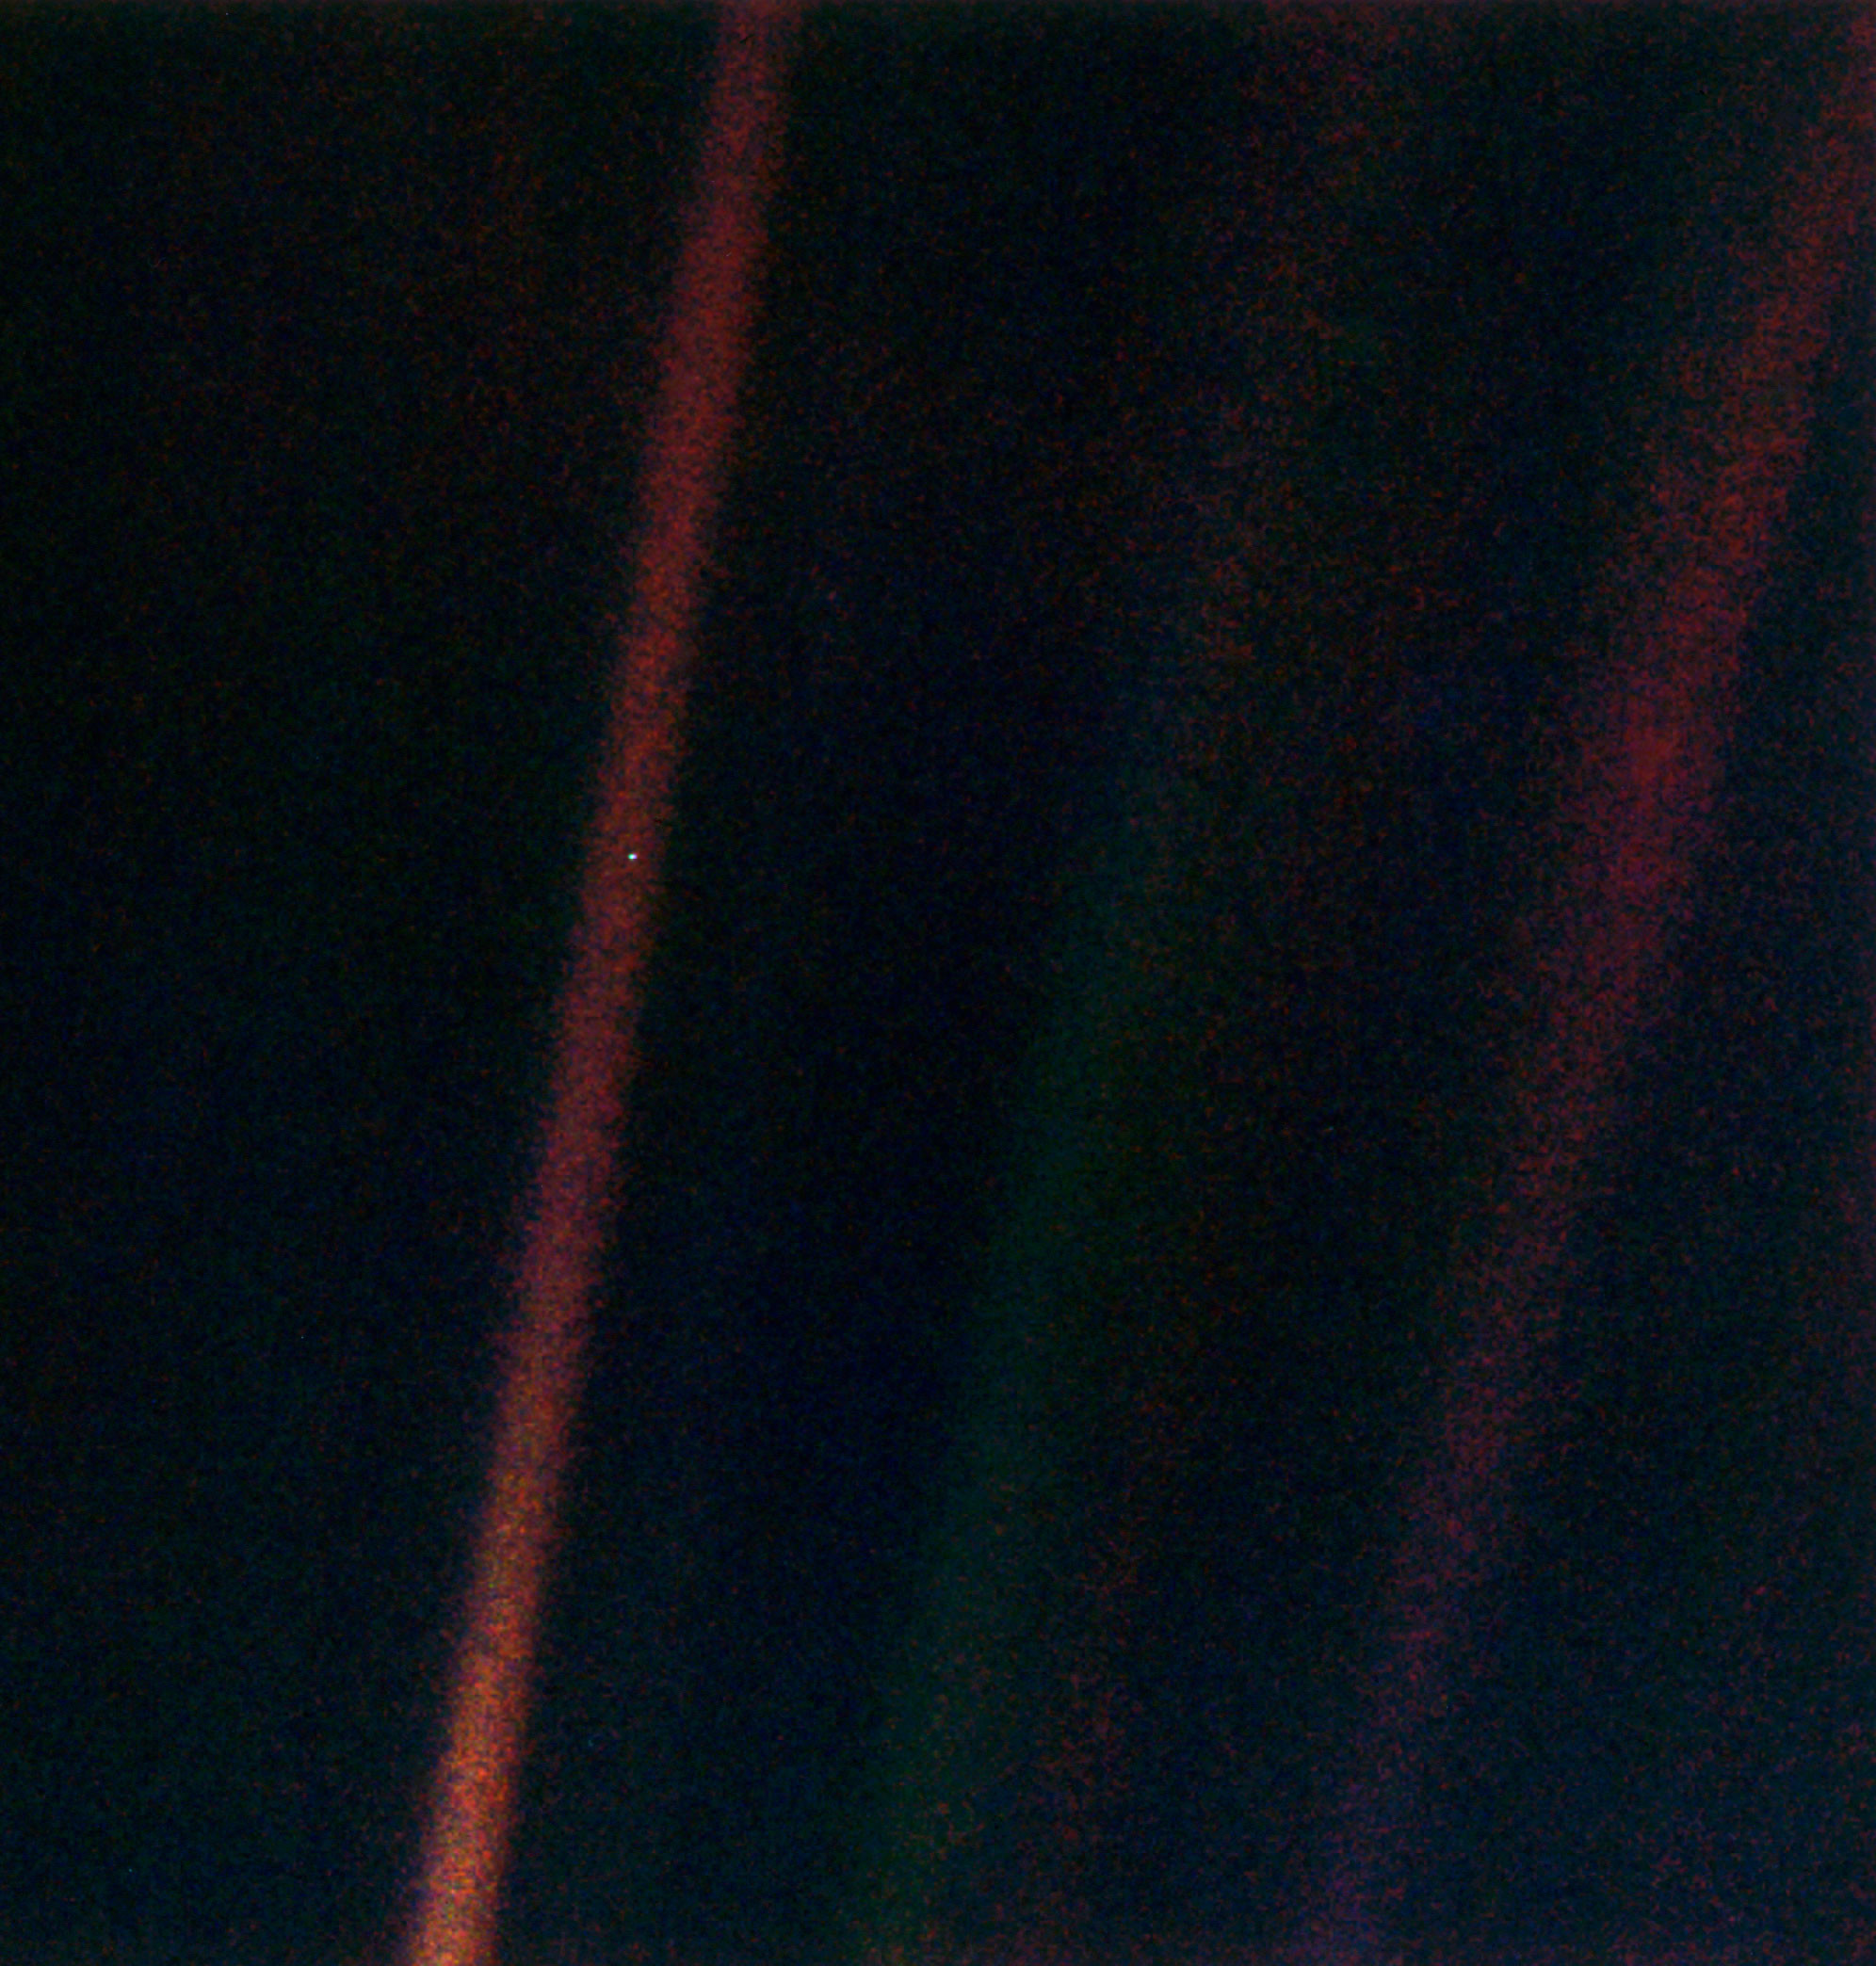 Pale Blue Dot by Voyager The most profound and defining photograph till today